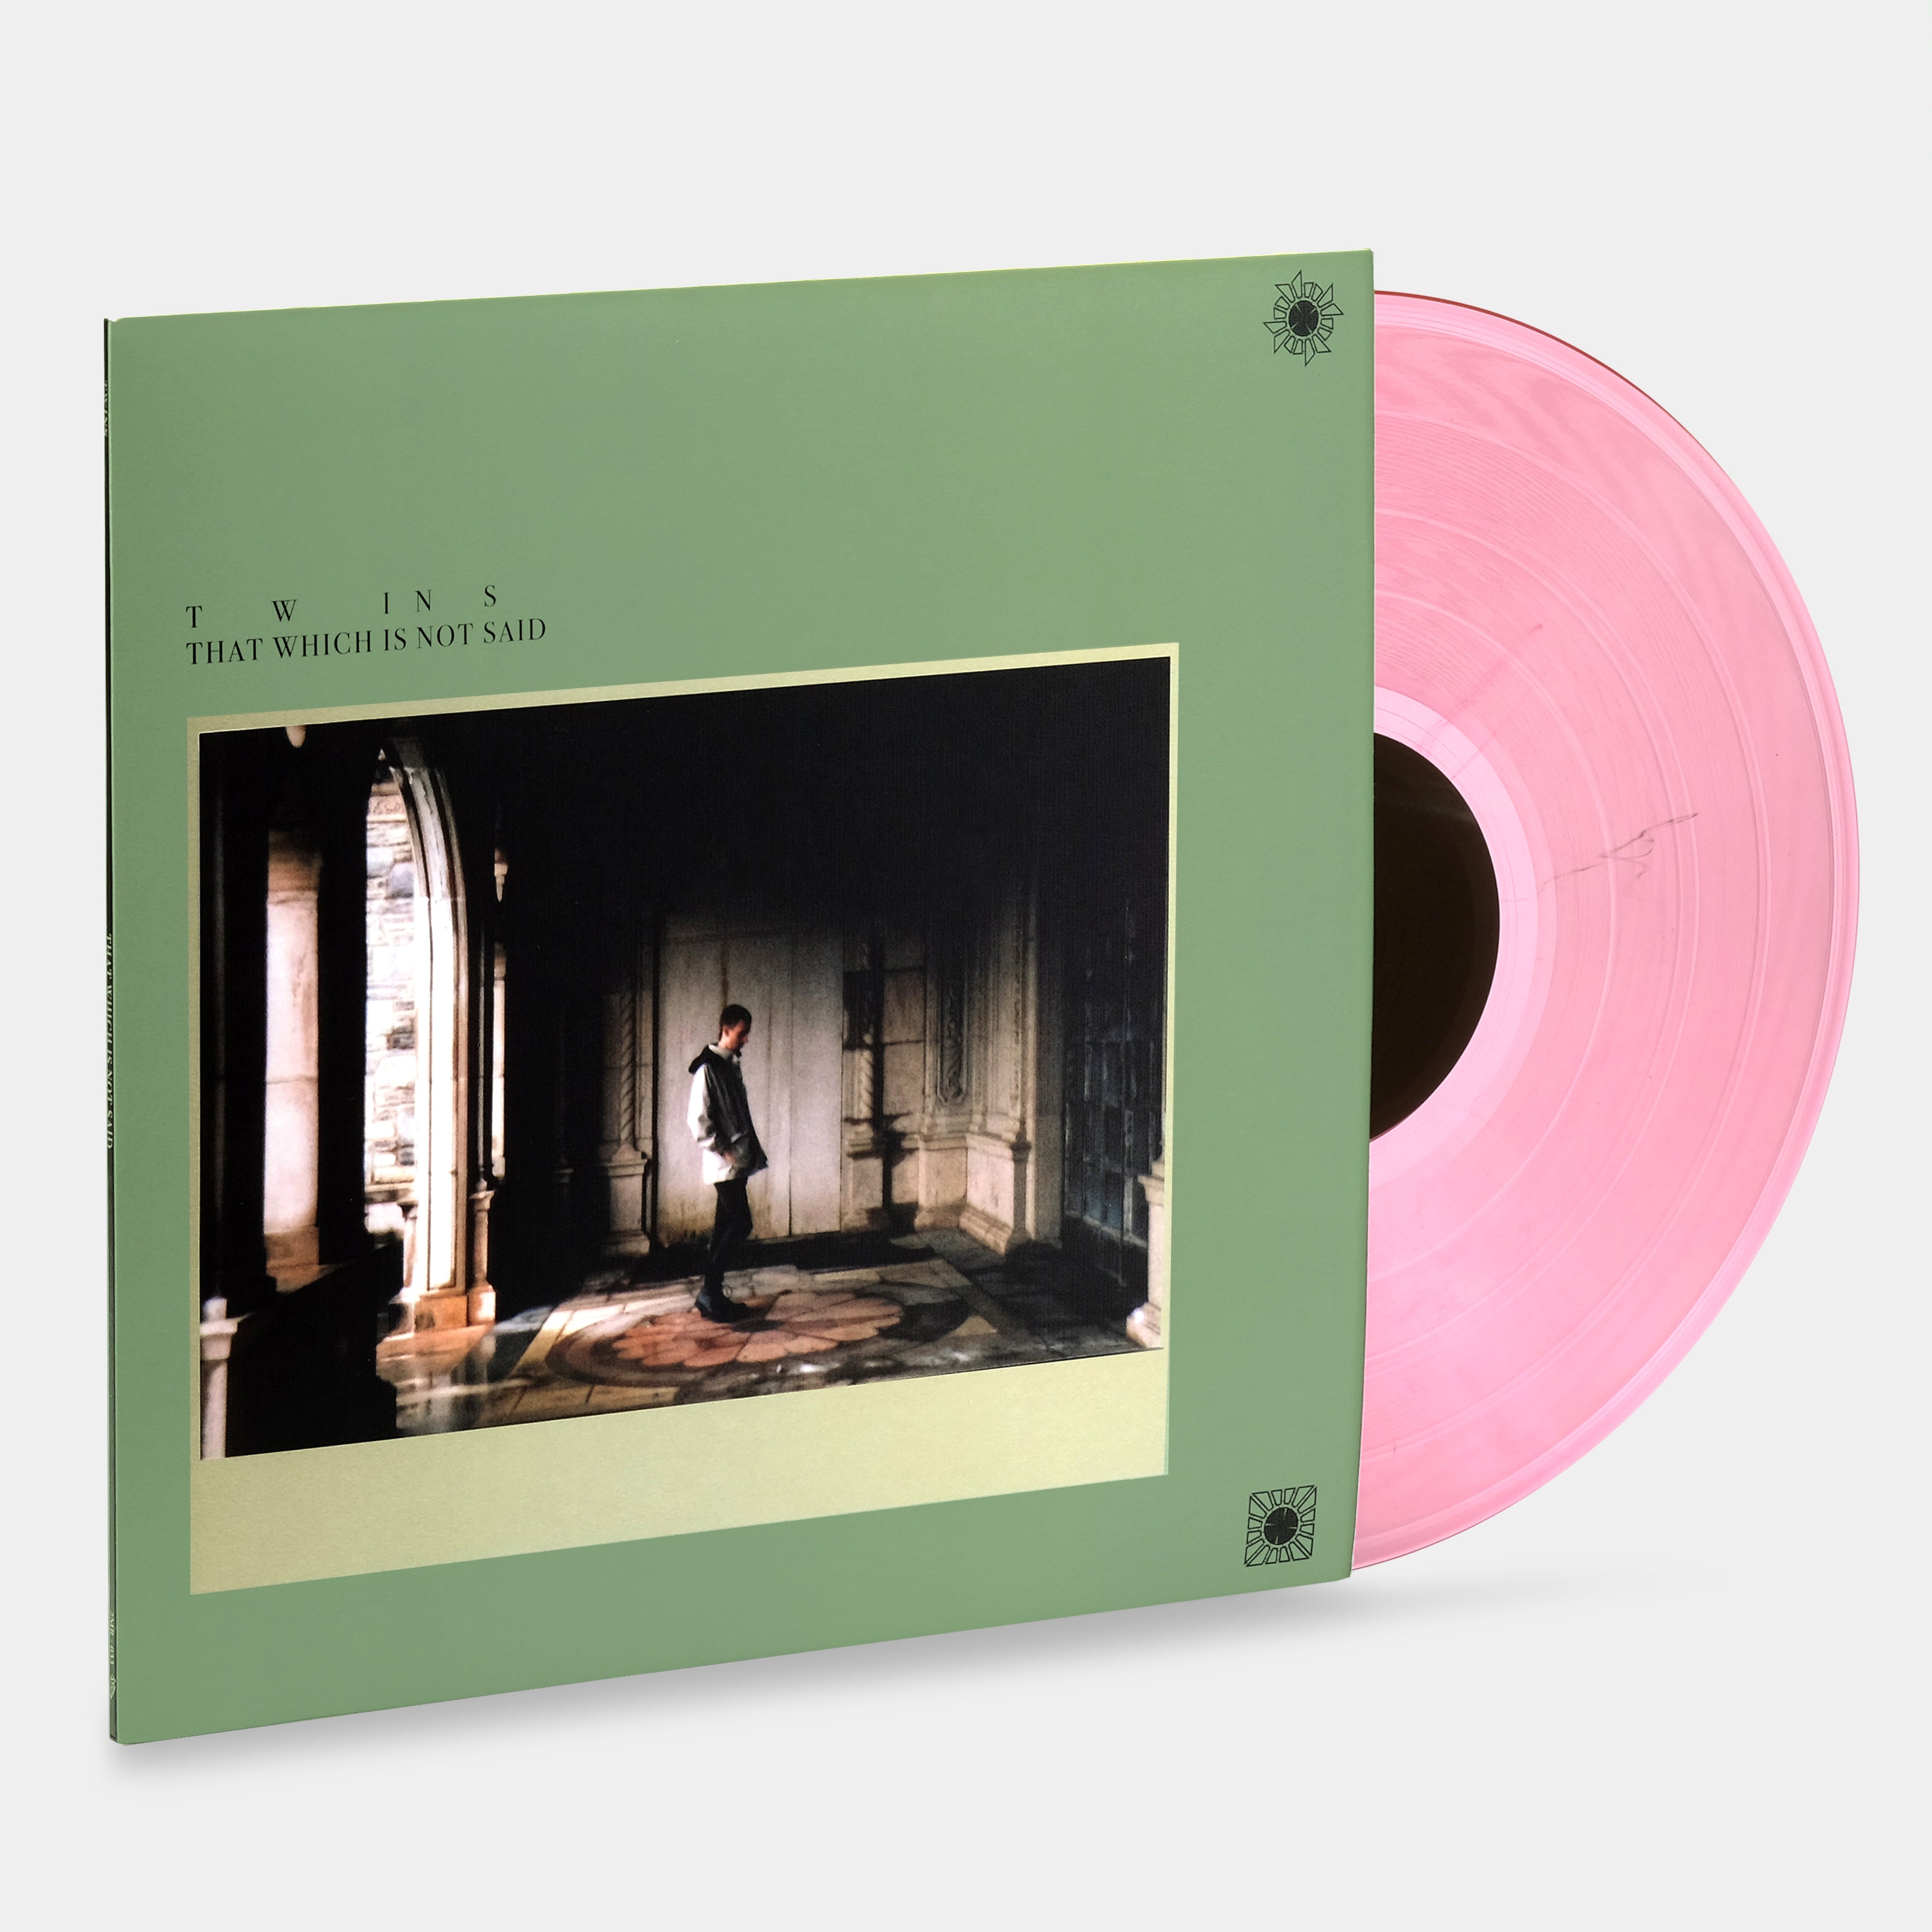 TWINS - That Which Is Not Said LP Pink Transparent Vinyl Record + 7" Single